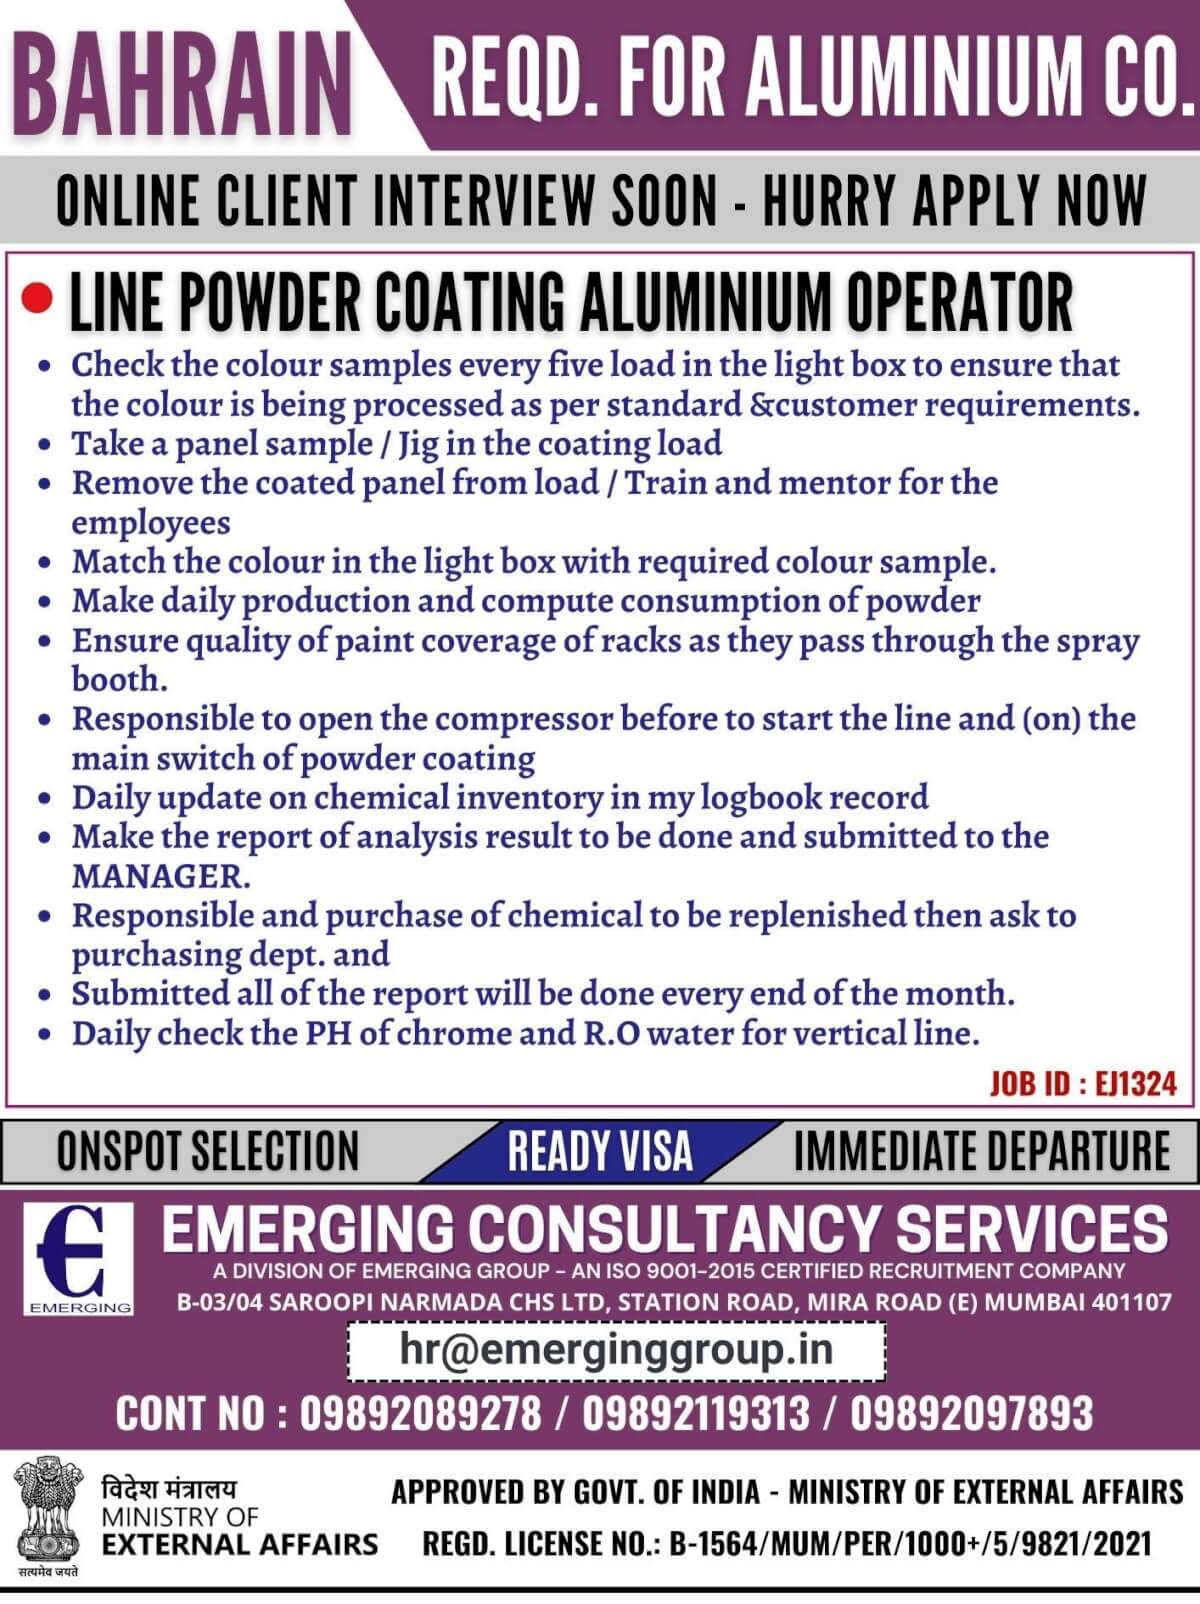 URGENTLY REQUIRED FOR ALUMINIUM COMPANY IN BAHRAIN